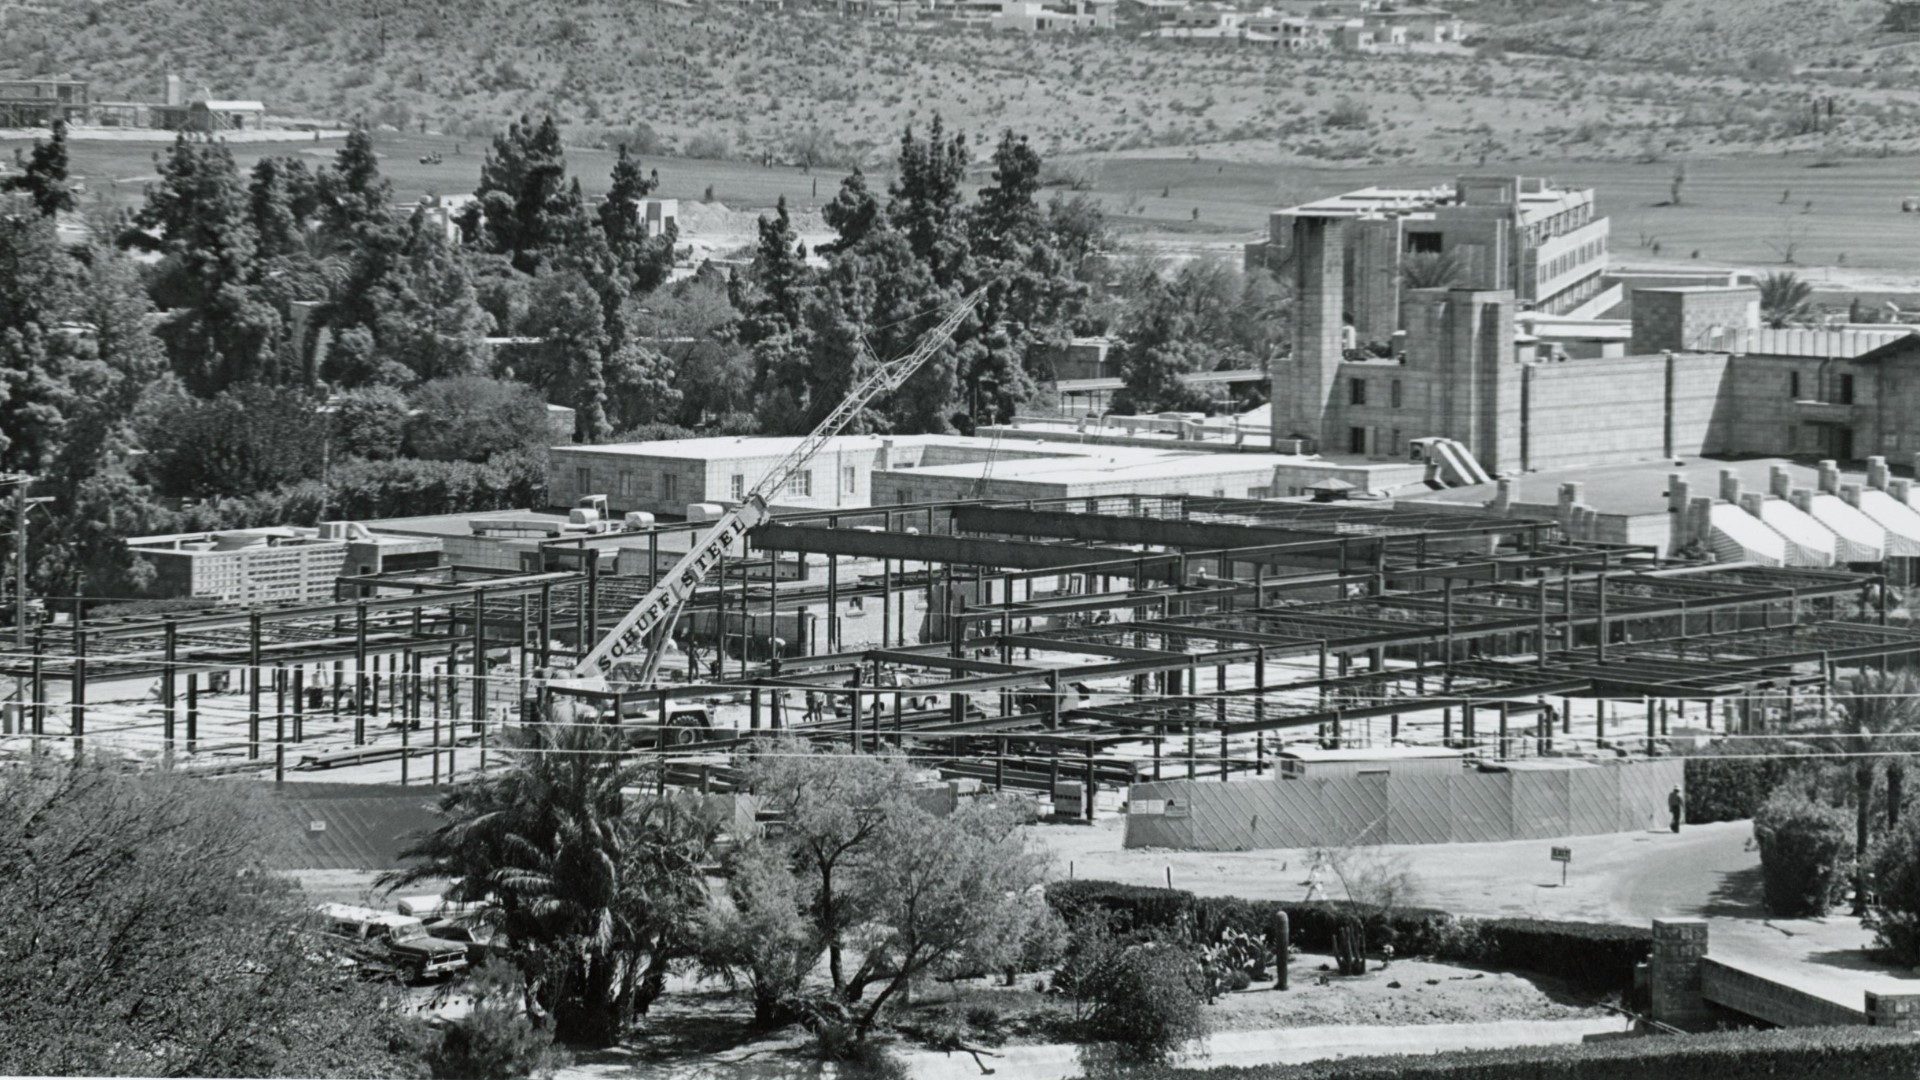 Host to nearly every president since Herbert Hoover and steeped in Southwest luxury, the historic Arizona Biltmore is celebrating its 95th Anniversary.